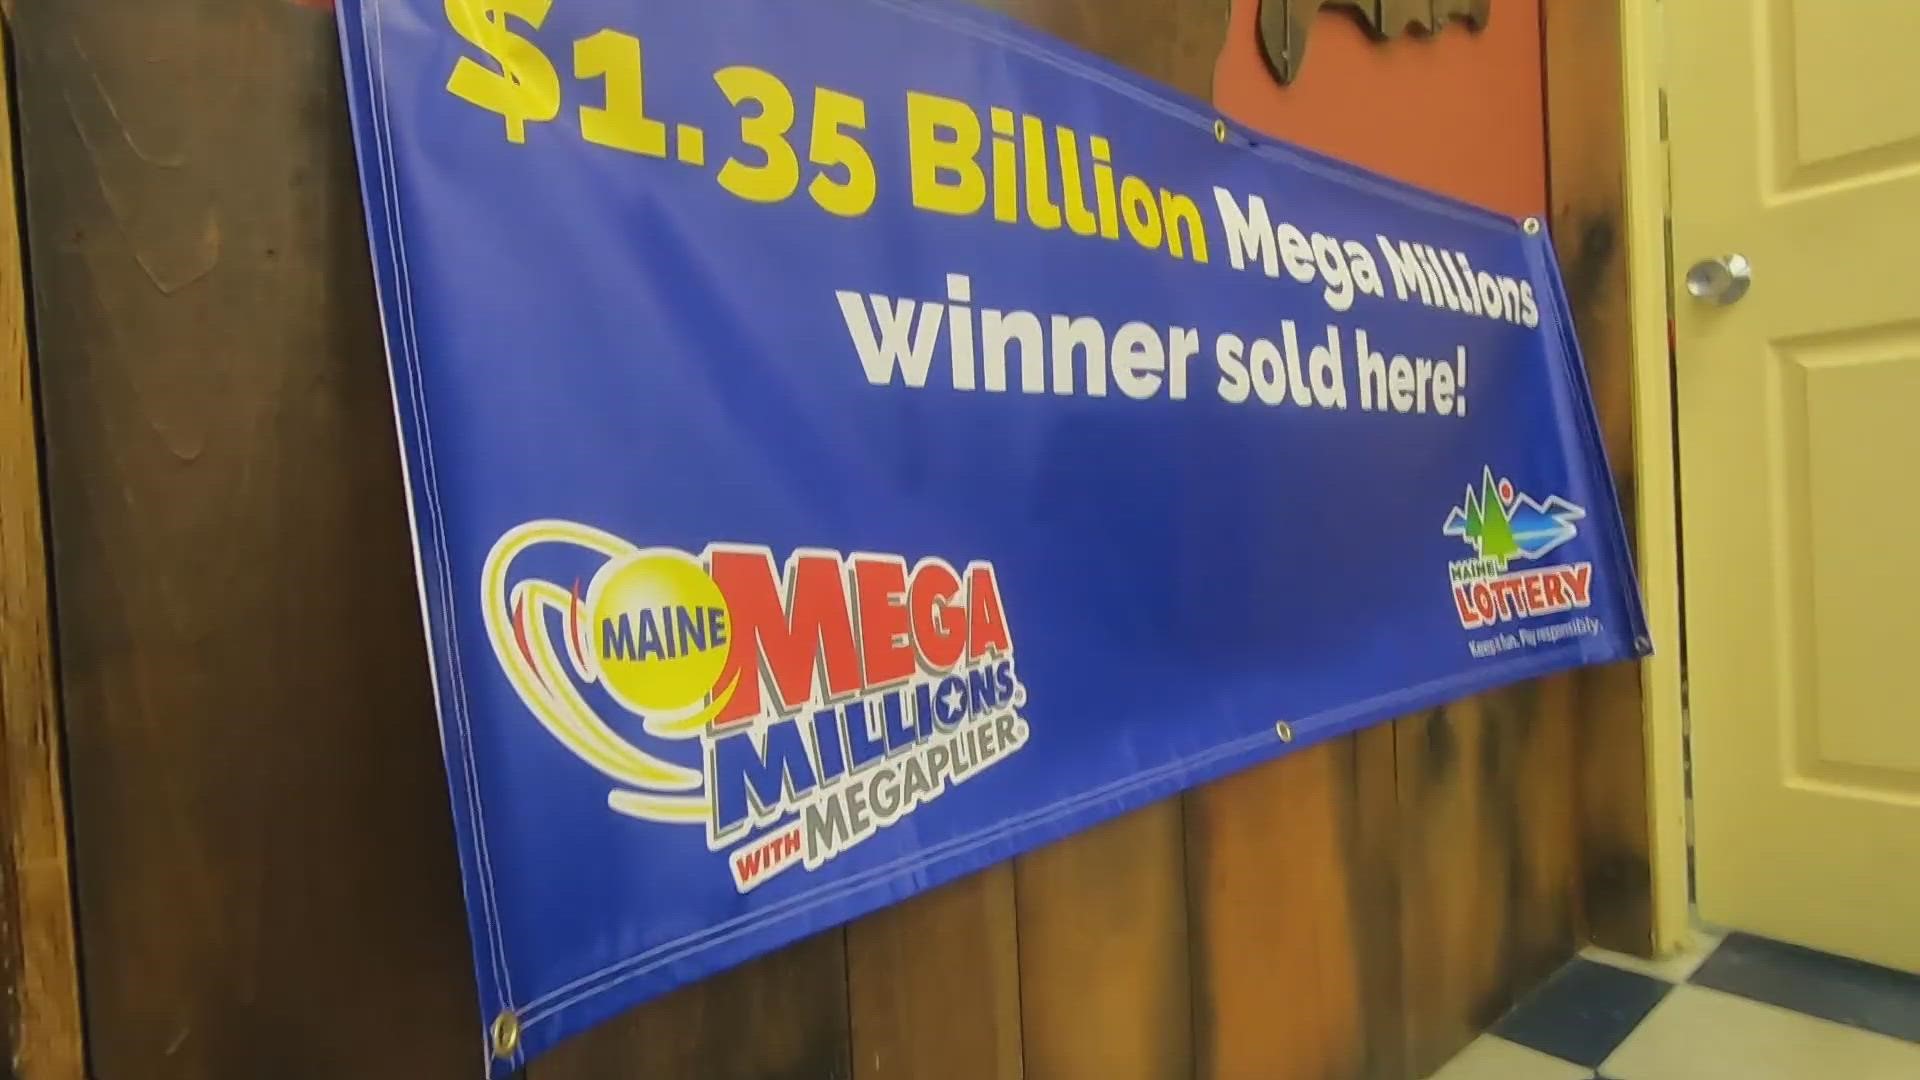 On Wednesday, a $50K check was awarded to the owner and staff of the Maine gas station that sold last month's winning $1.35B Mega Millions Jackpot ticket.